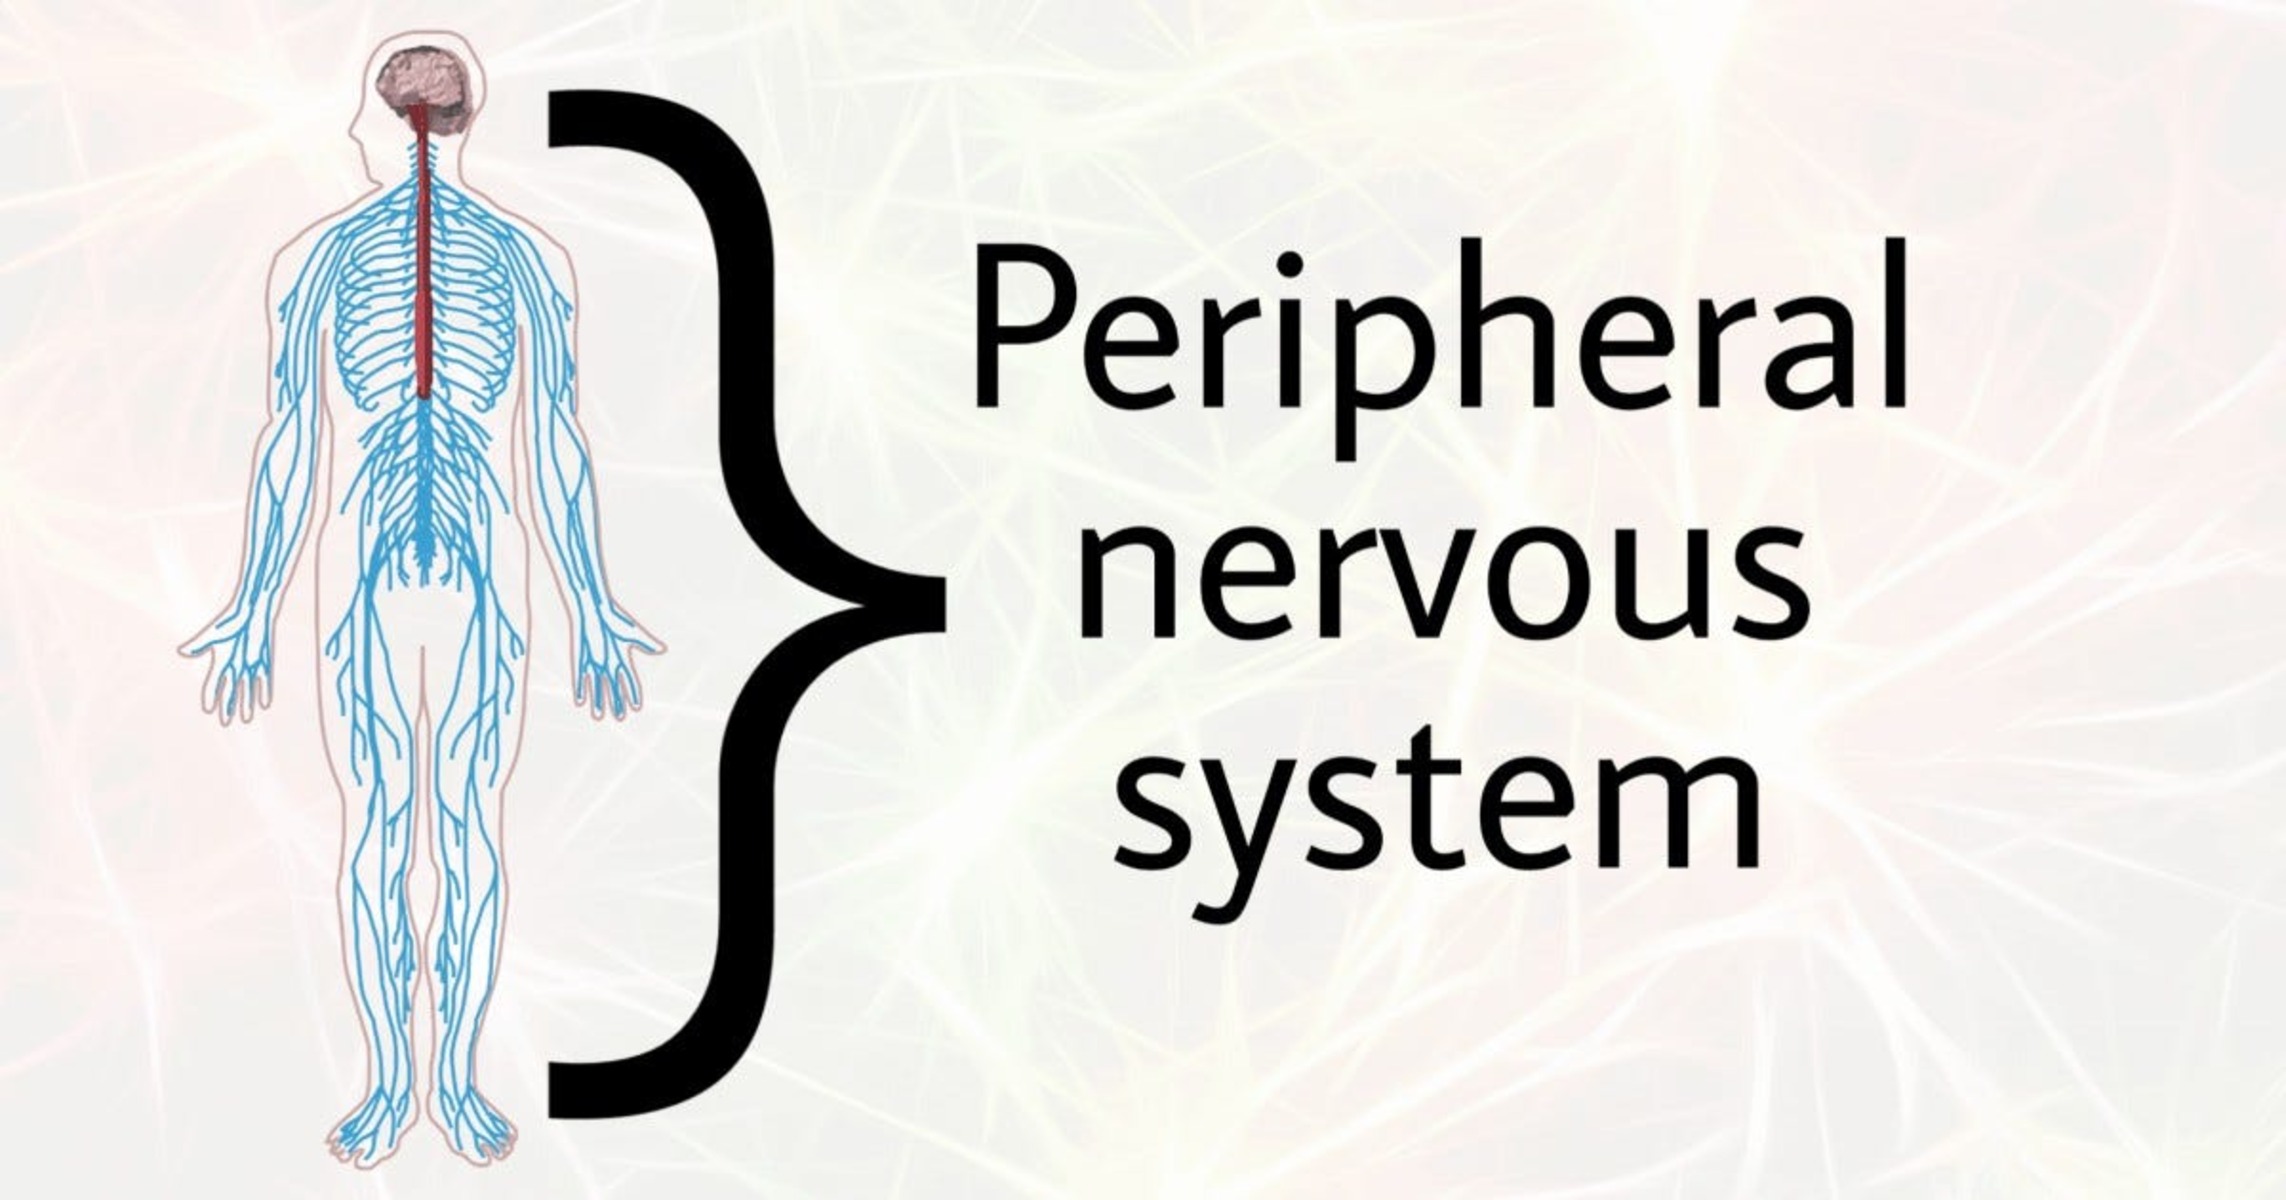 19-mind-blowing-facts-about-peripheral-nervous-system